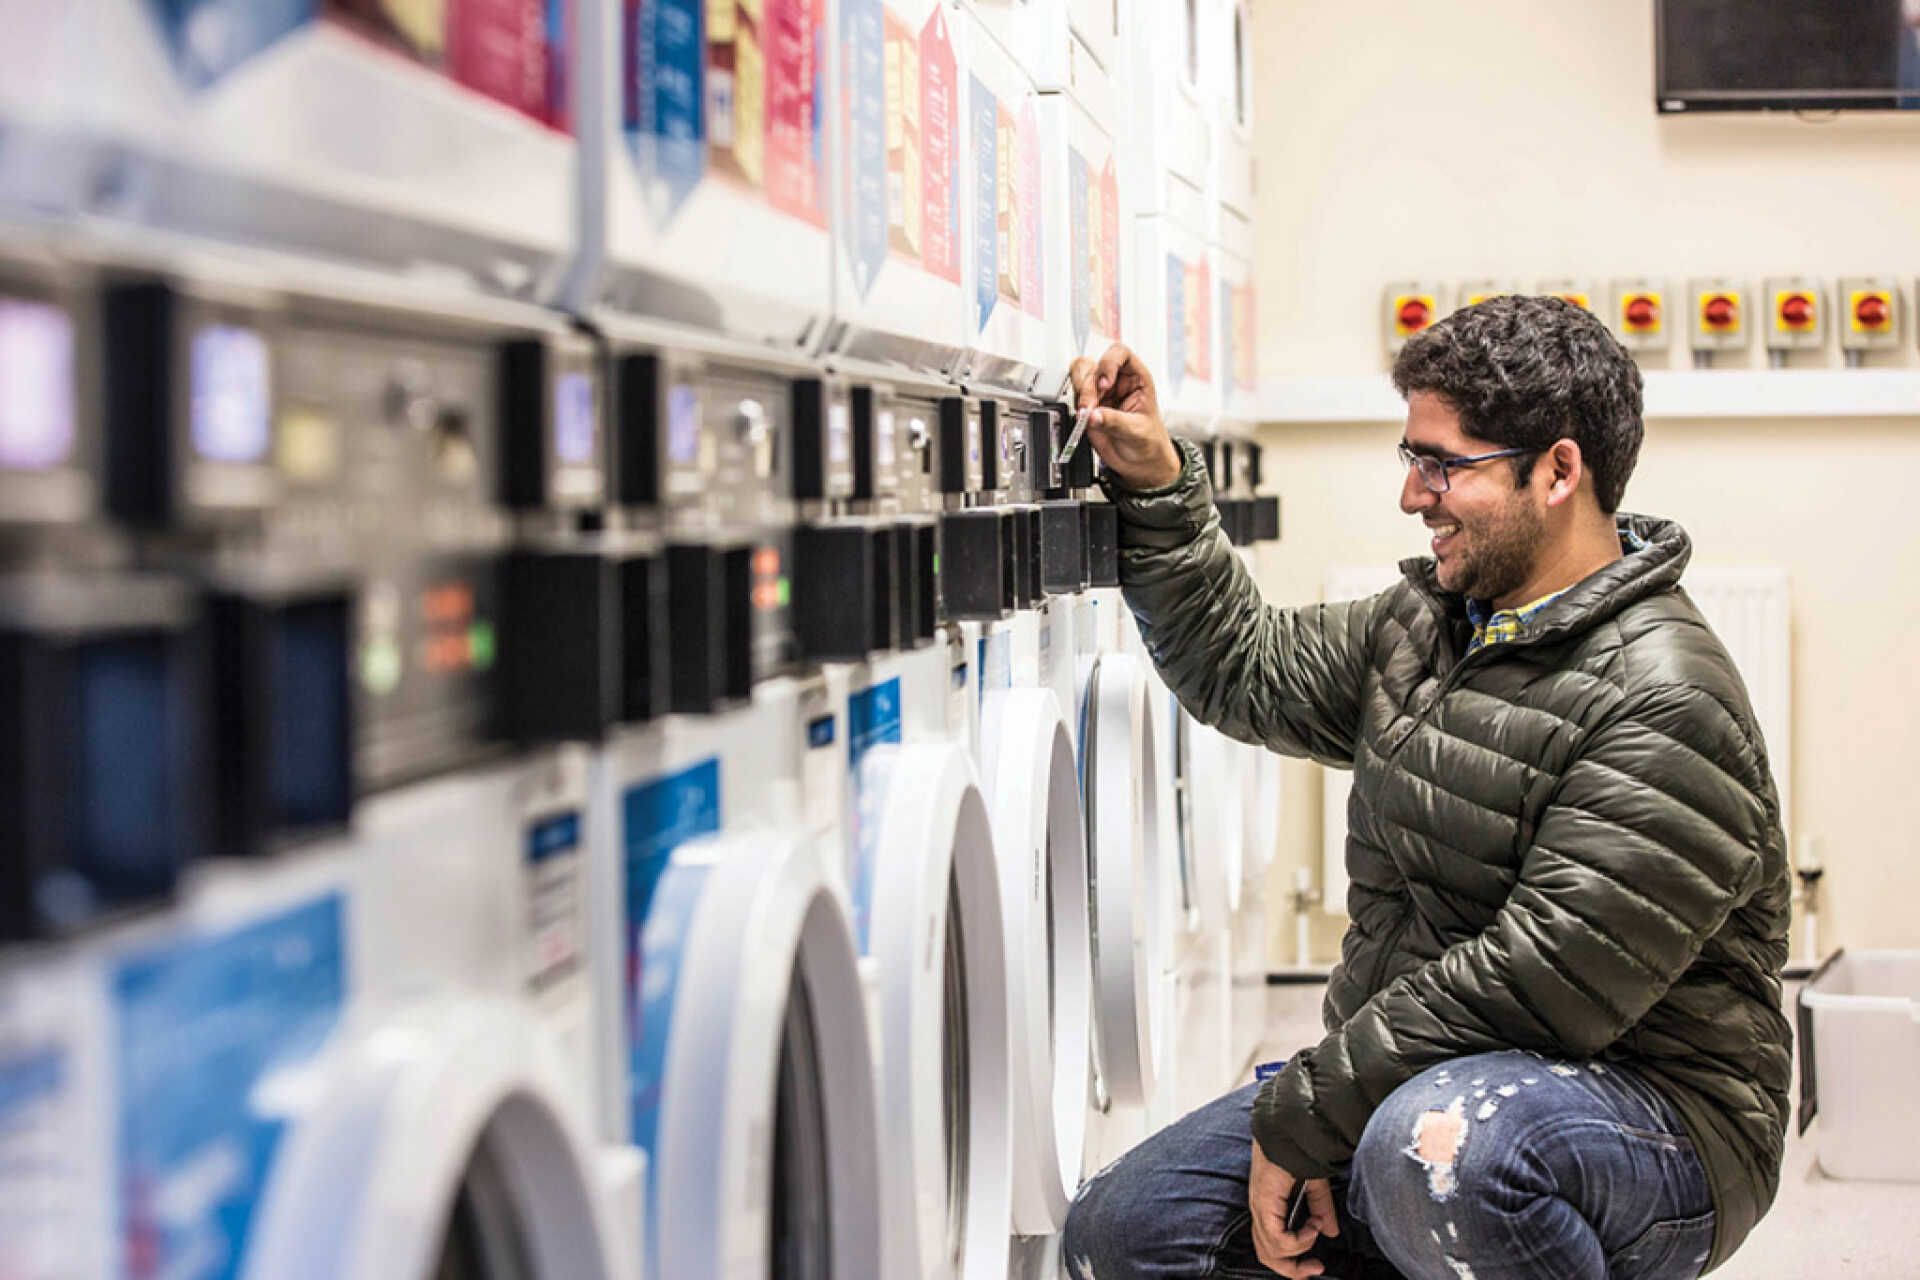 Male student using laundry